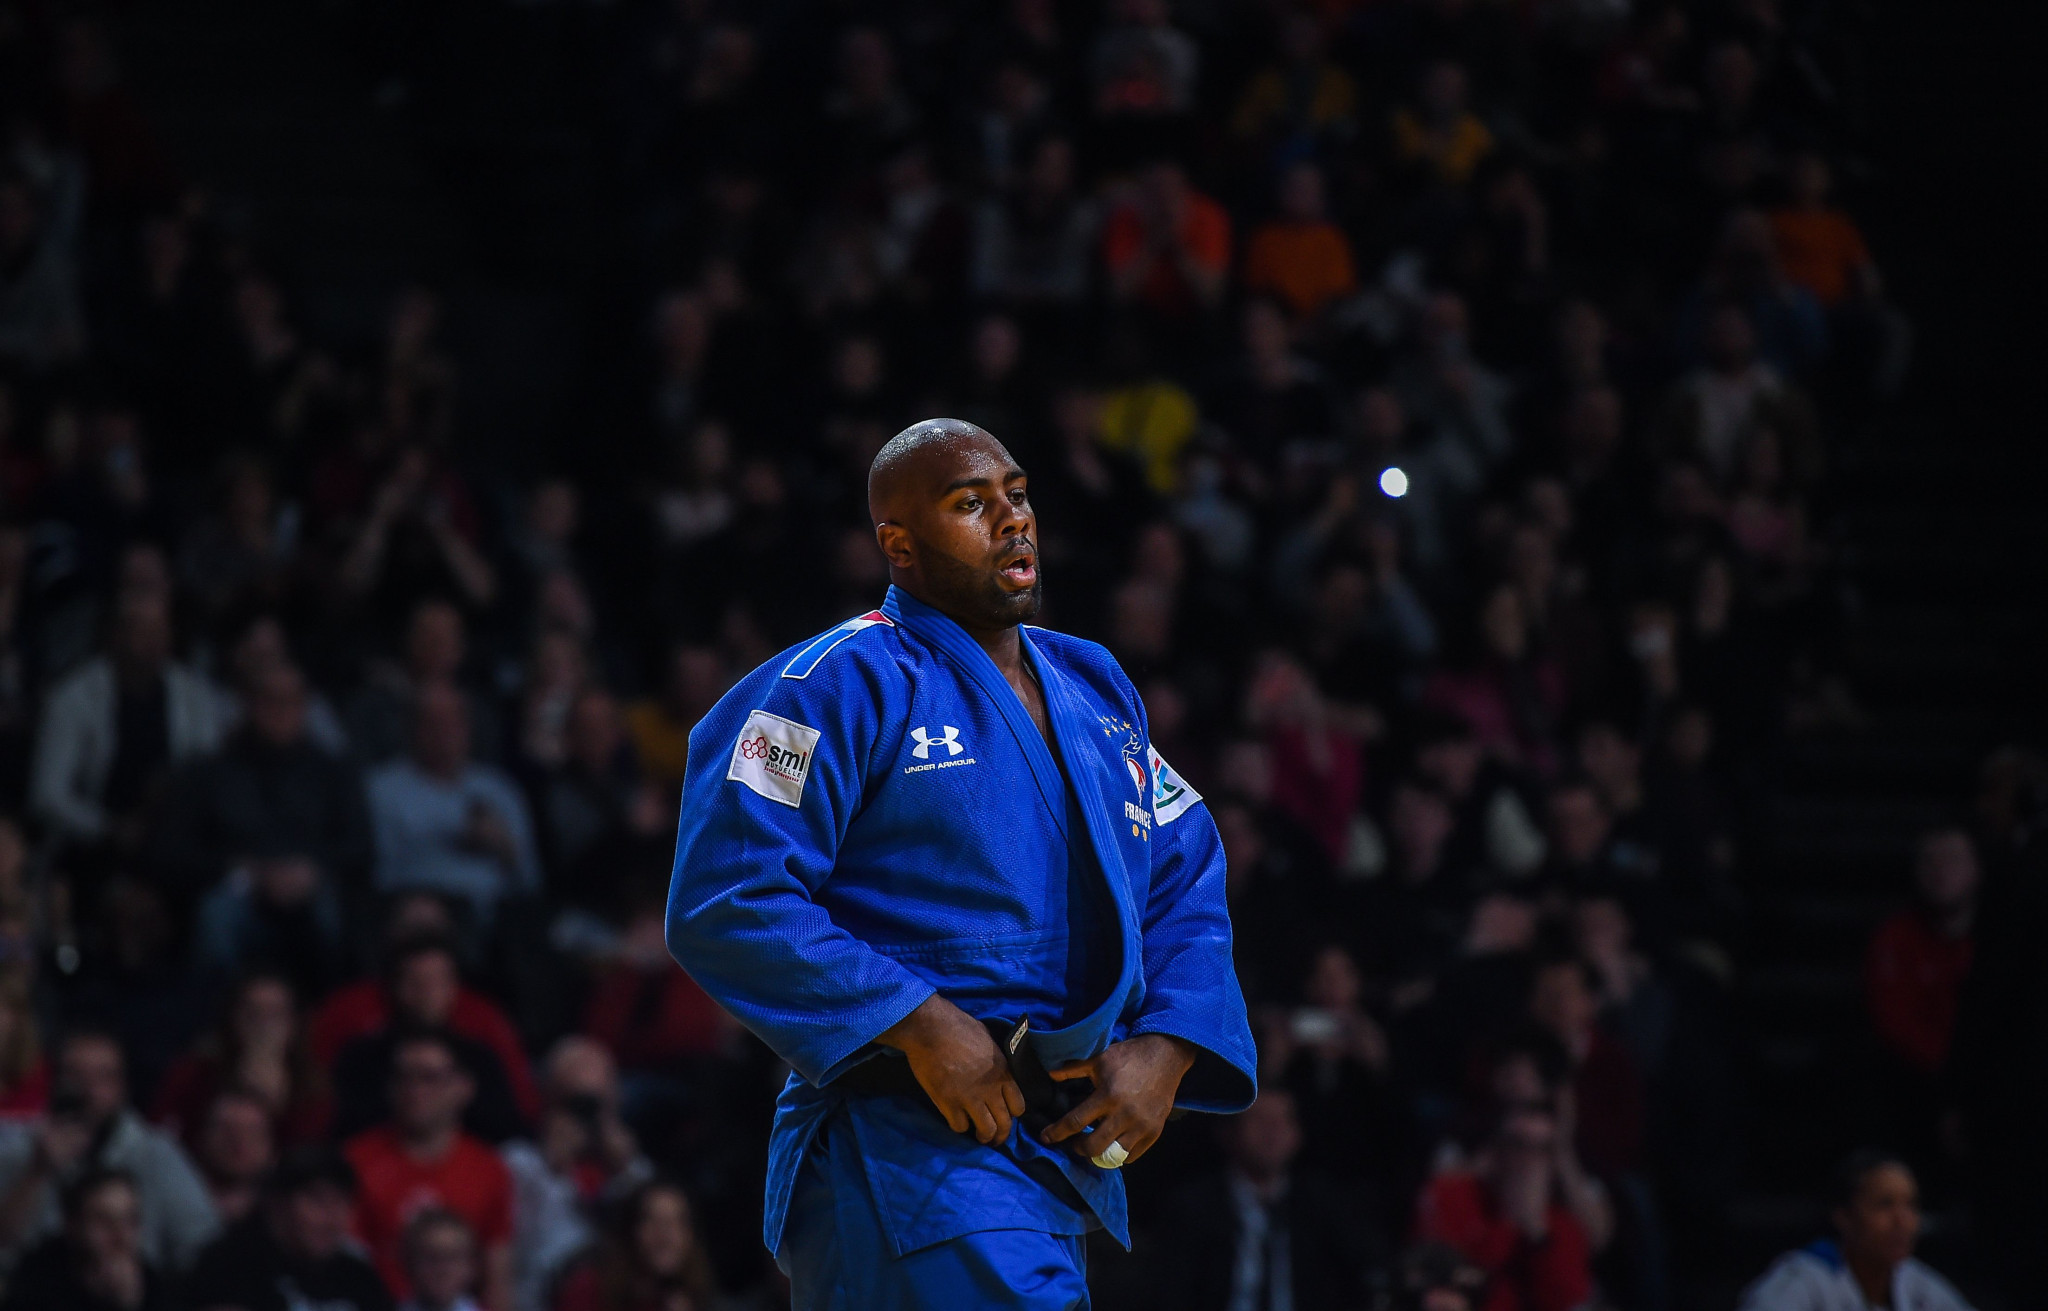 Judoka Teddy Riner was one of the athletes targeted ©Getty Images